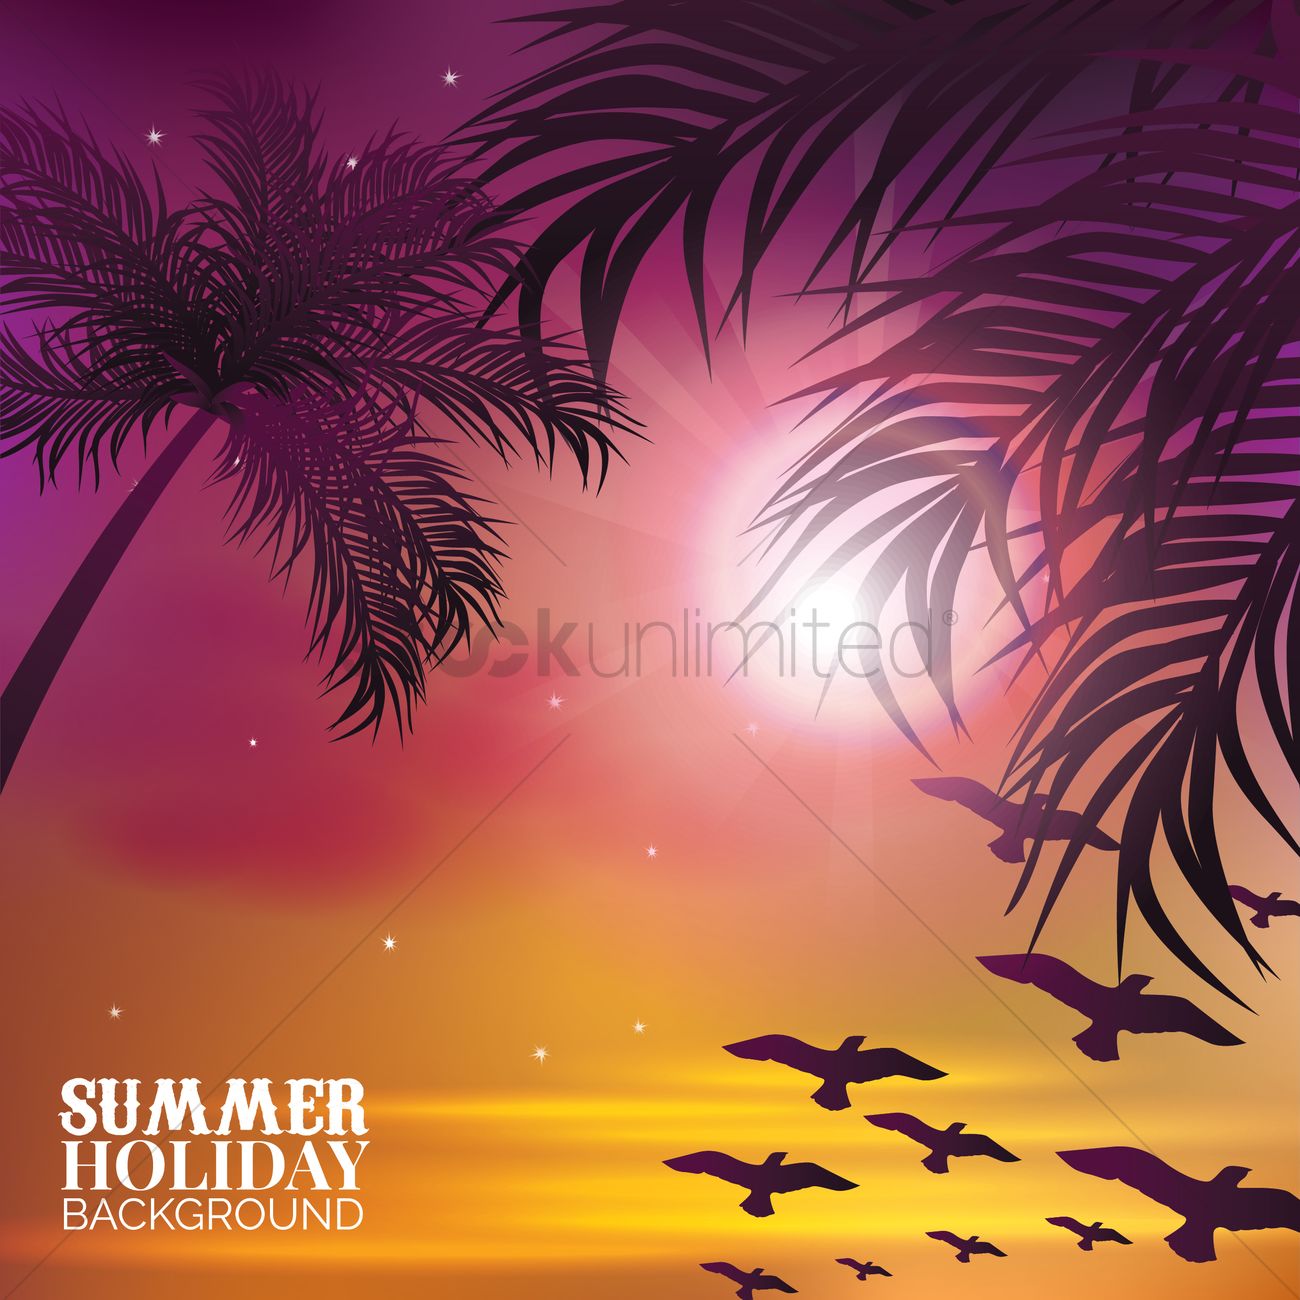 Summer Holiday Background Vector Image Stockunlimited